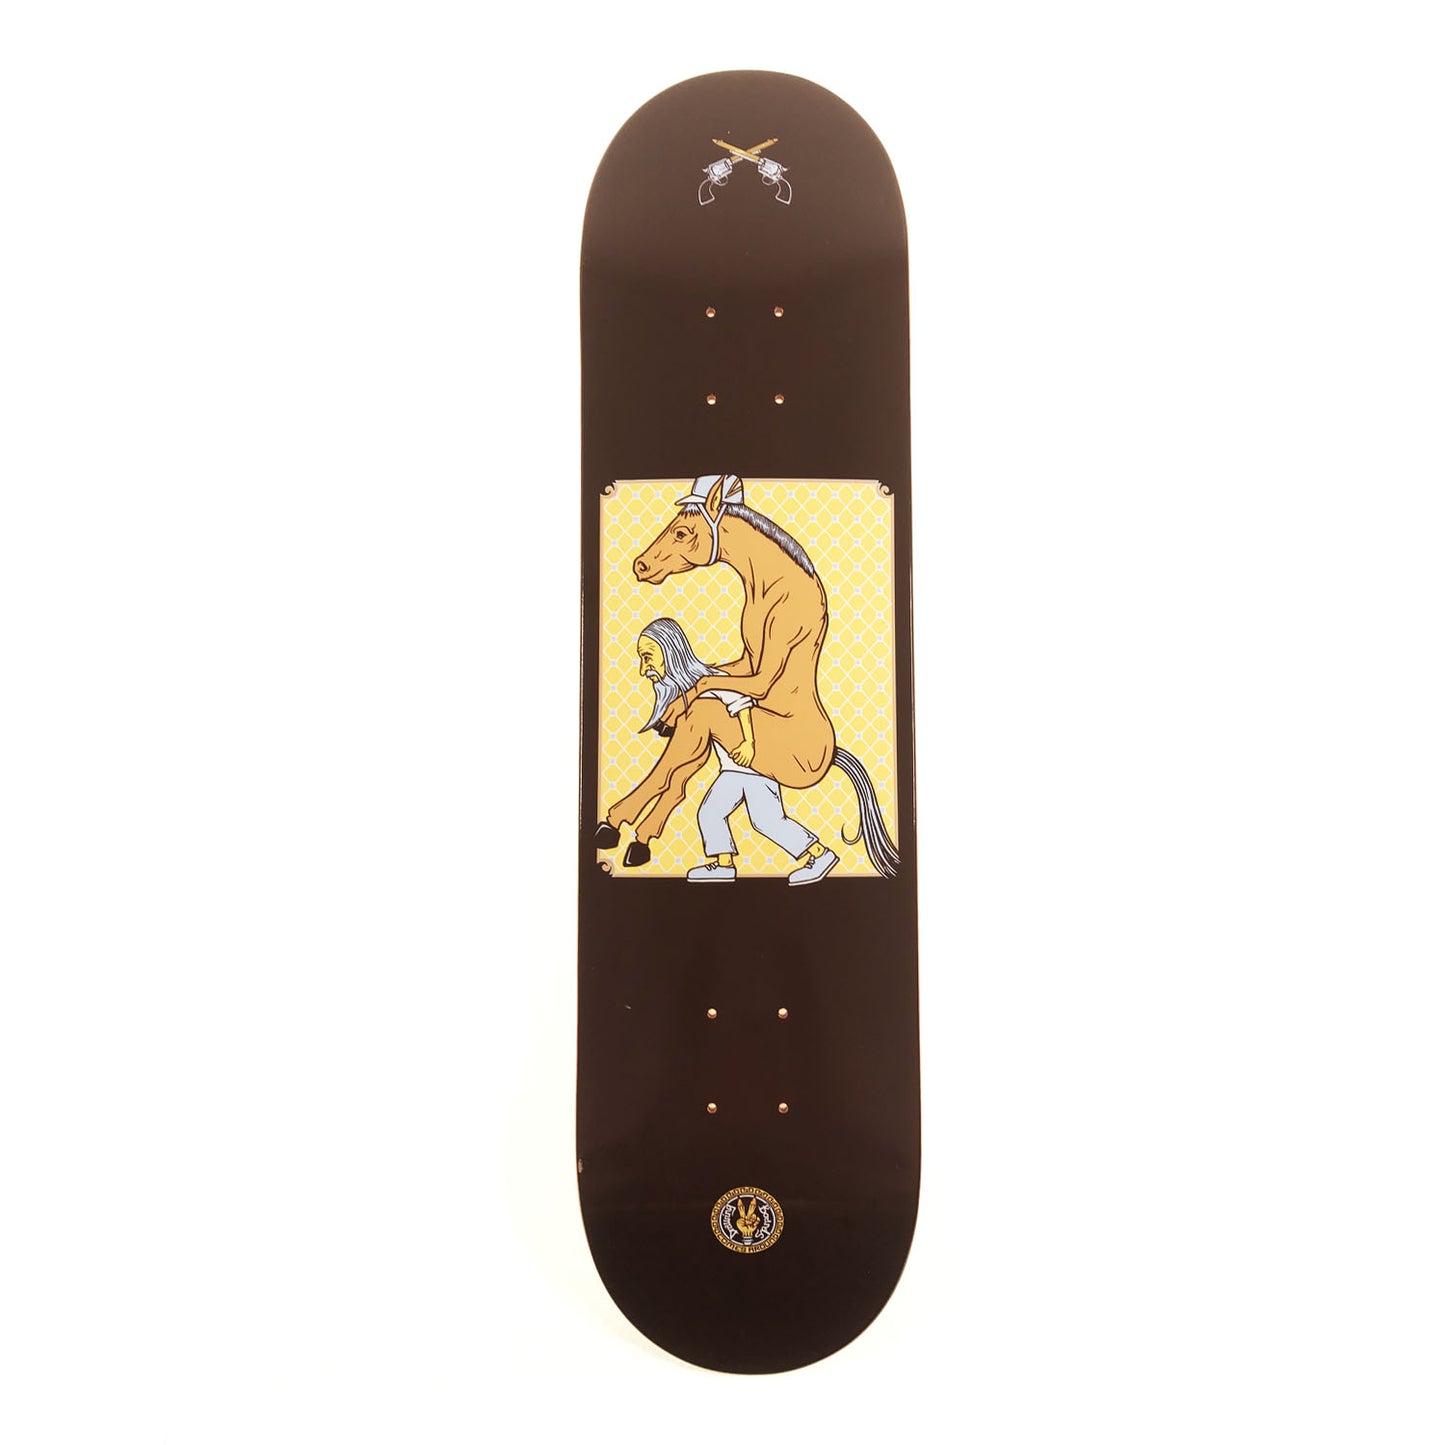 The Drawing Boards - 8.0" - Horse Power Deck - Prime Delux Store